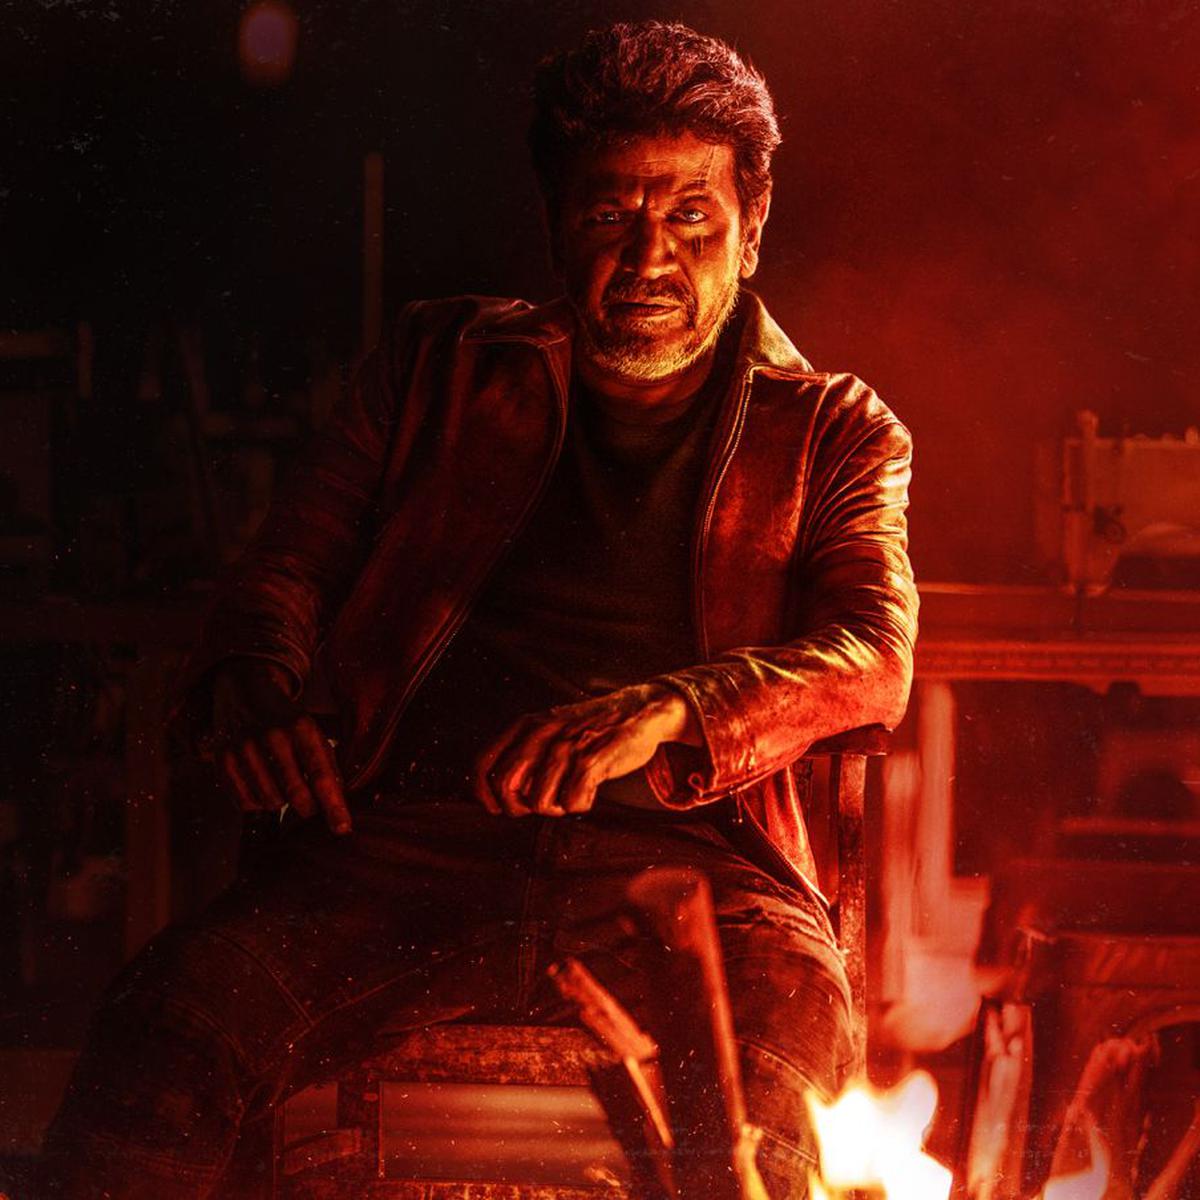 Ghost' movie review: Shivarajkumar shines in a potent yet